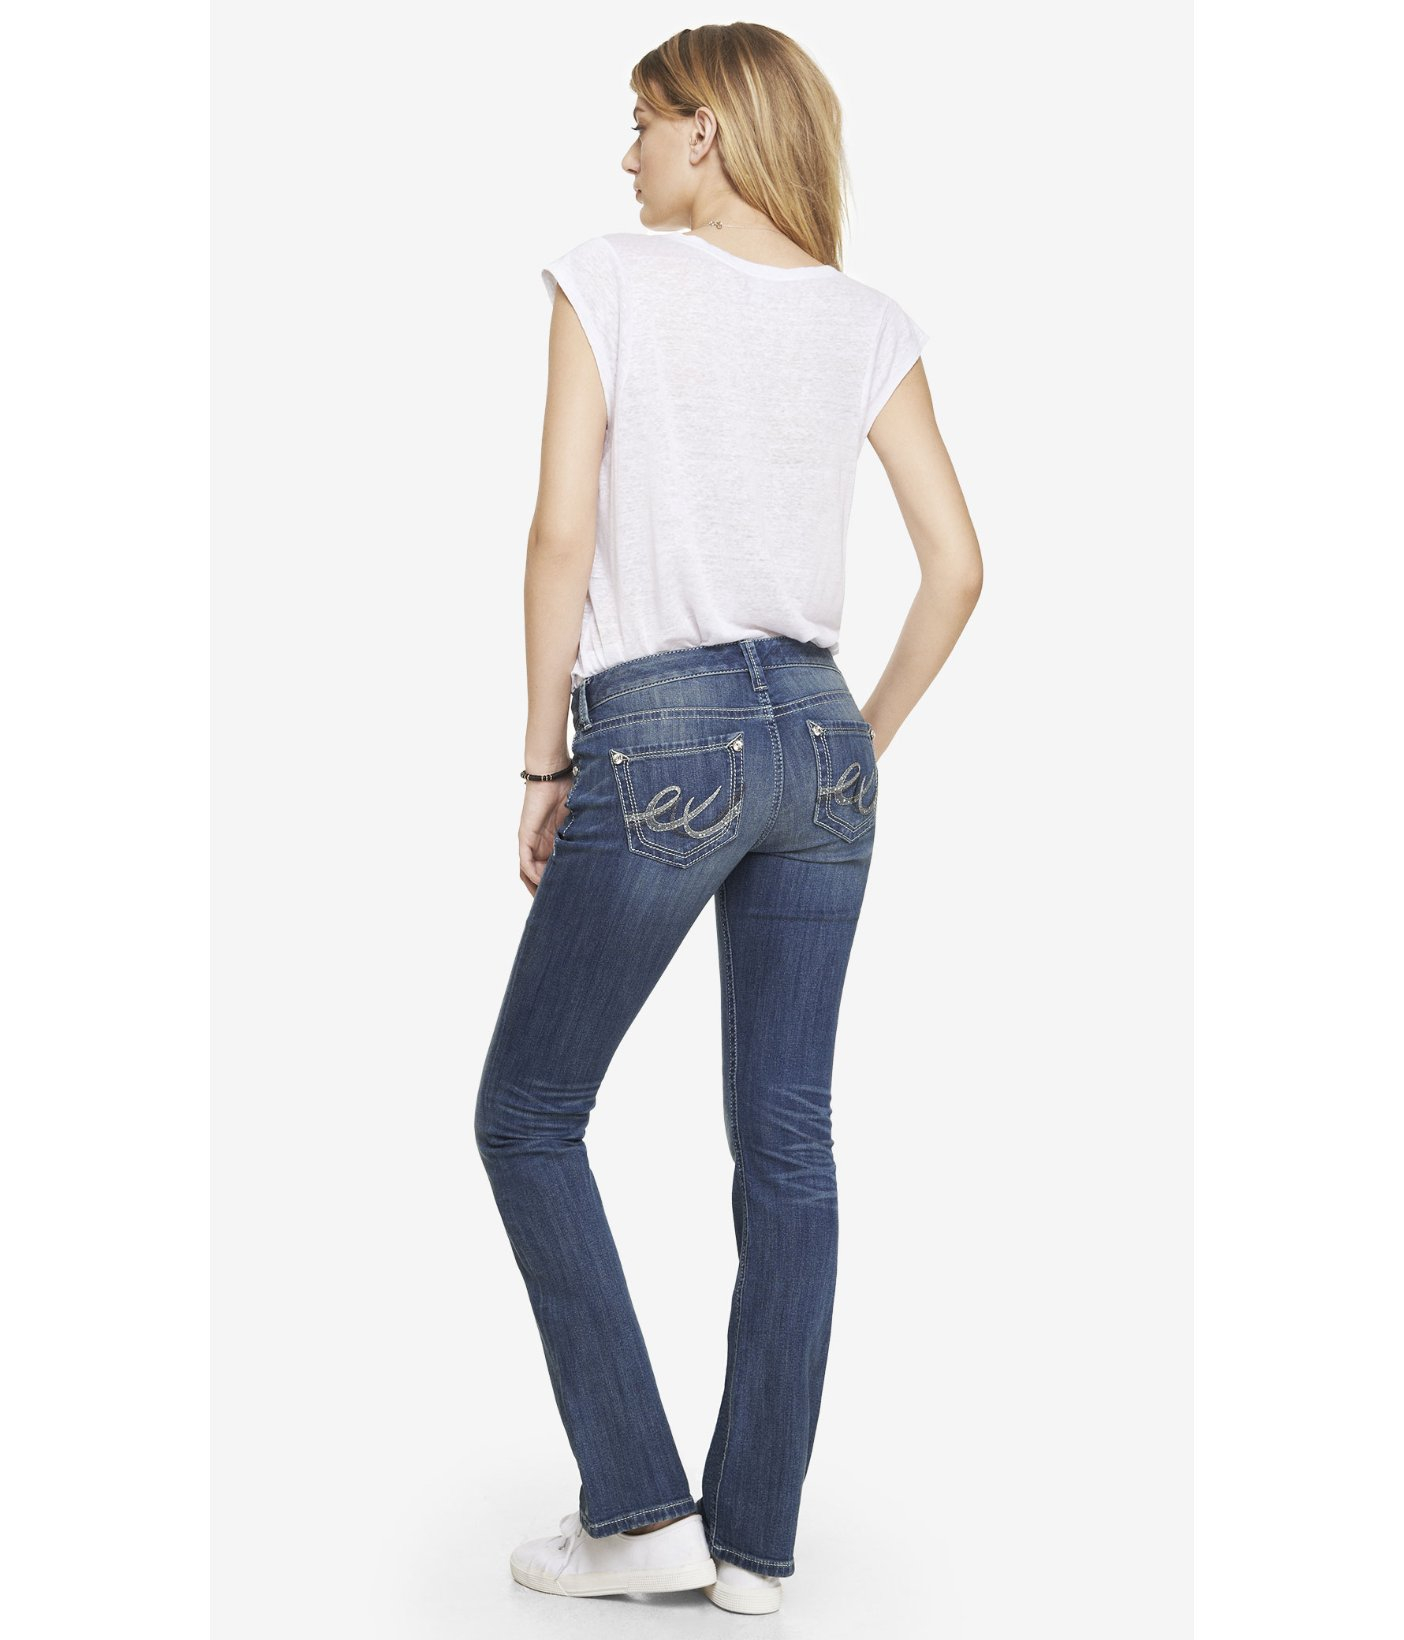 Express Barely Jeans Luxembourg, SAVE 50% - fearthemecca.com